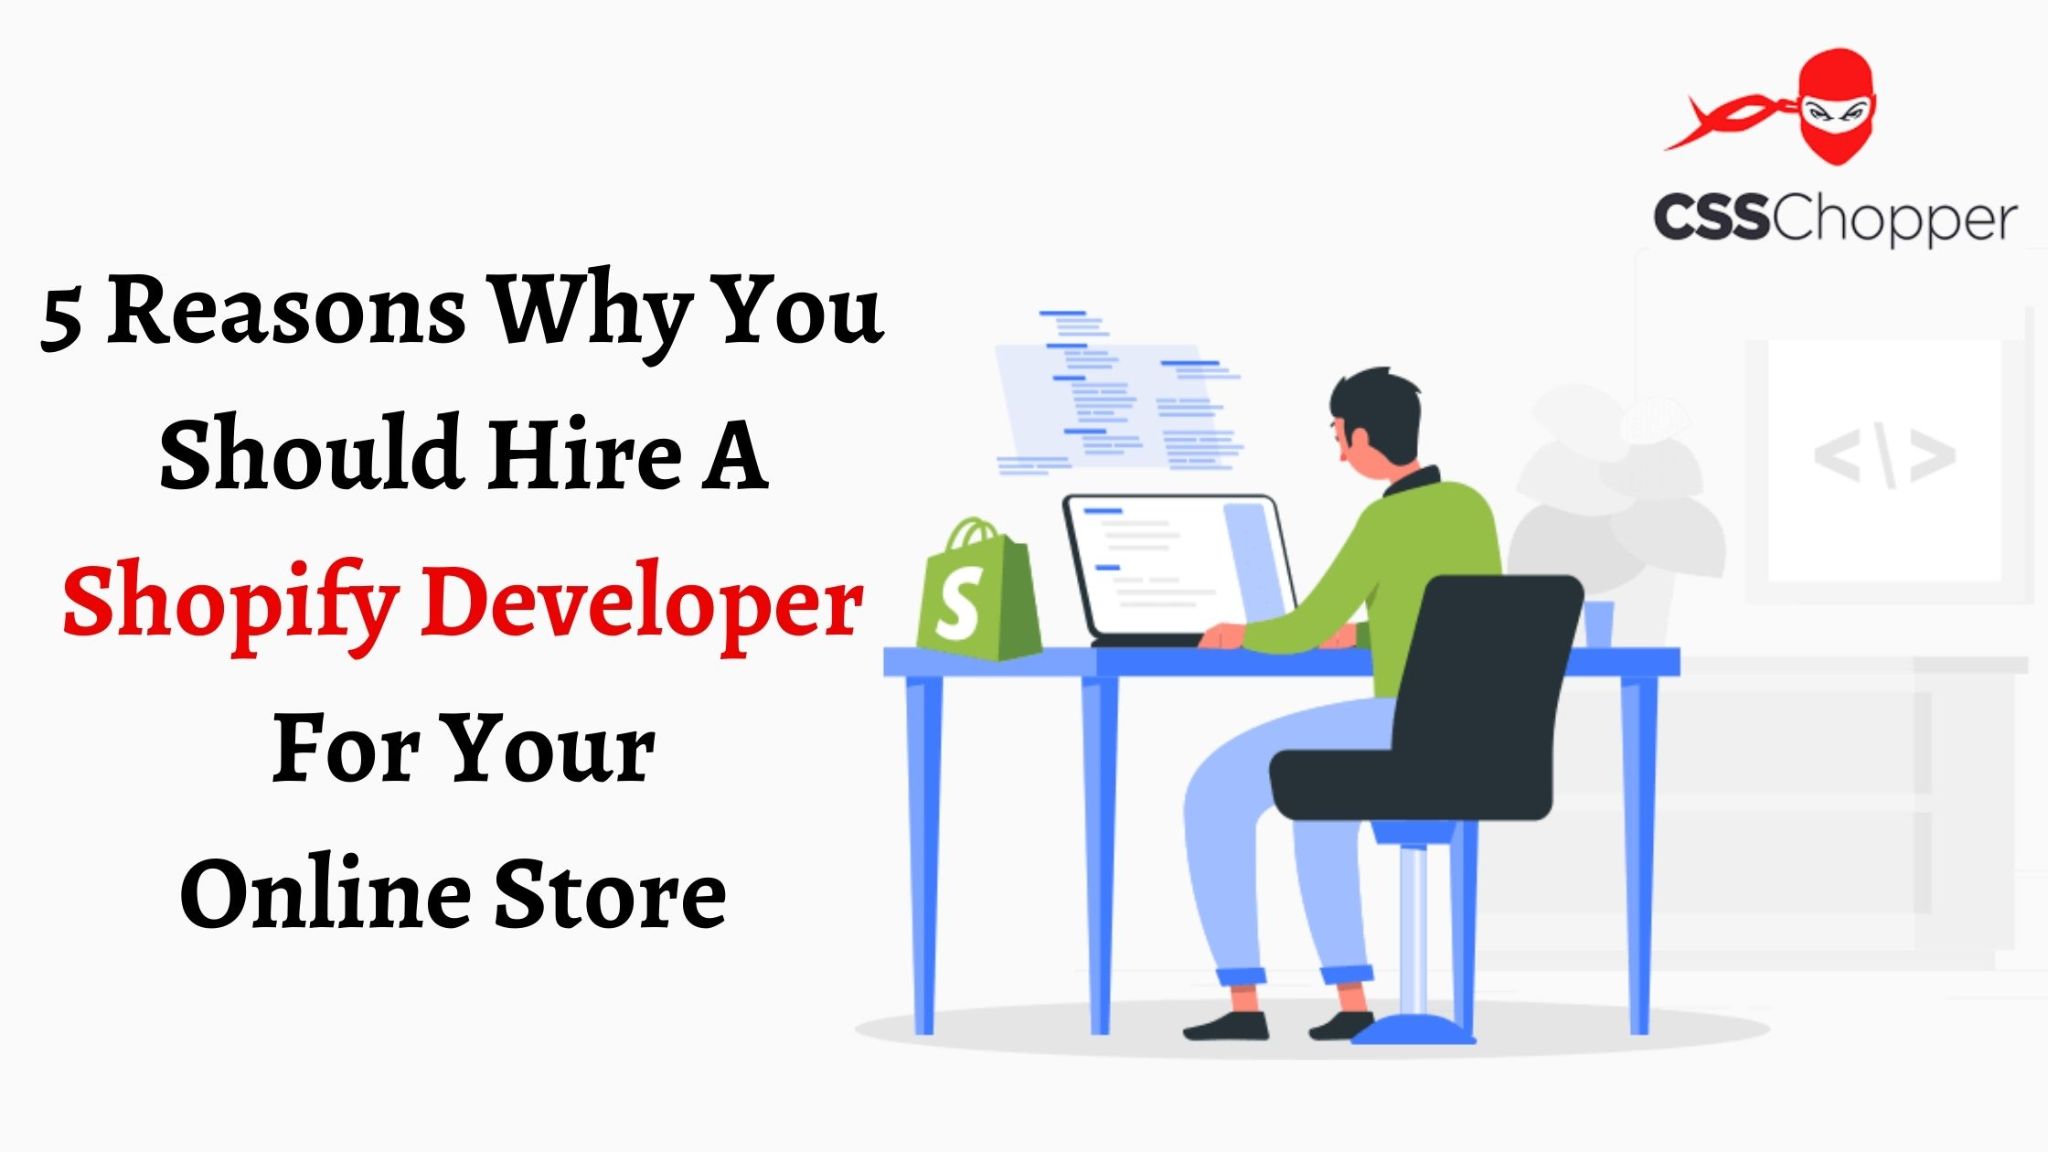 5 Reasons Why You Should Hire A Shopify Developer For Your Online Store